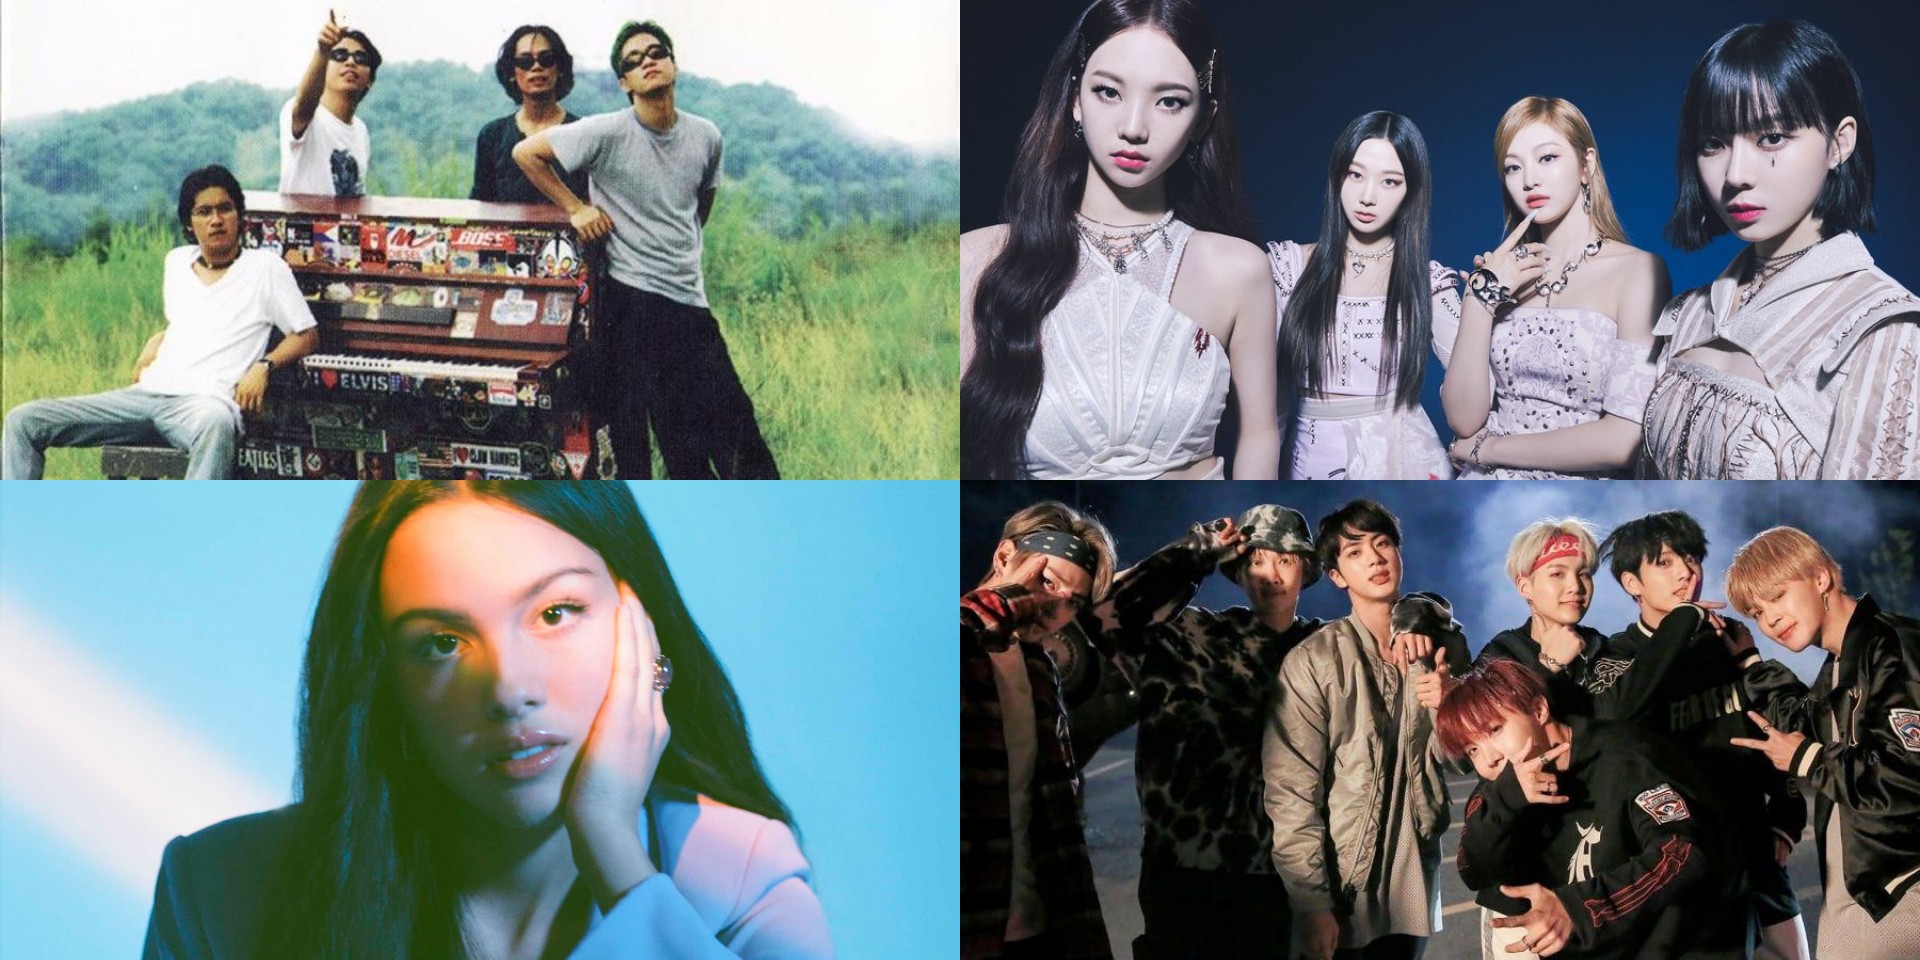 7 songs to soundtrack your daily life to on Instagram Music — BTS, Olivia Rodrigo, aespa, Eraserheads, and more